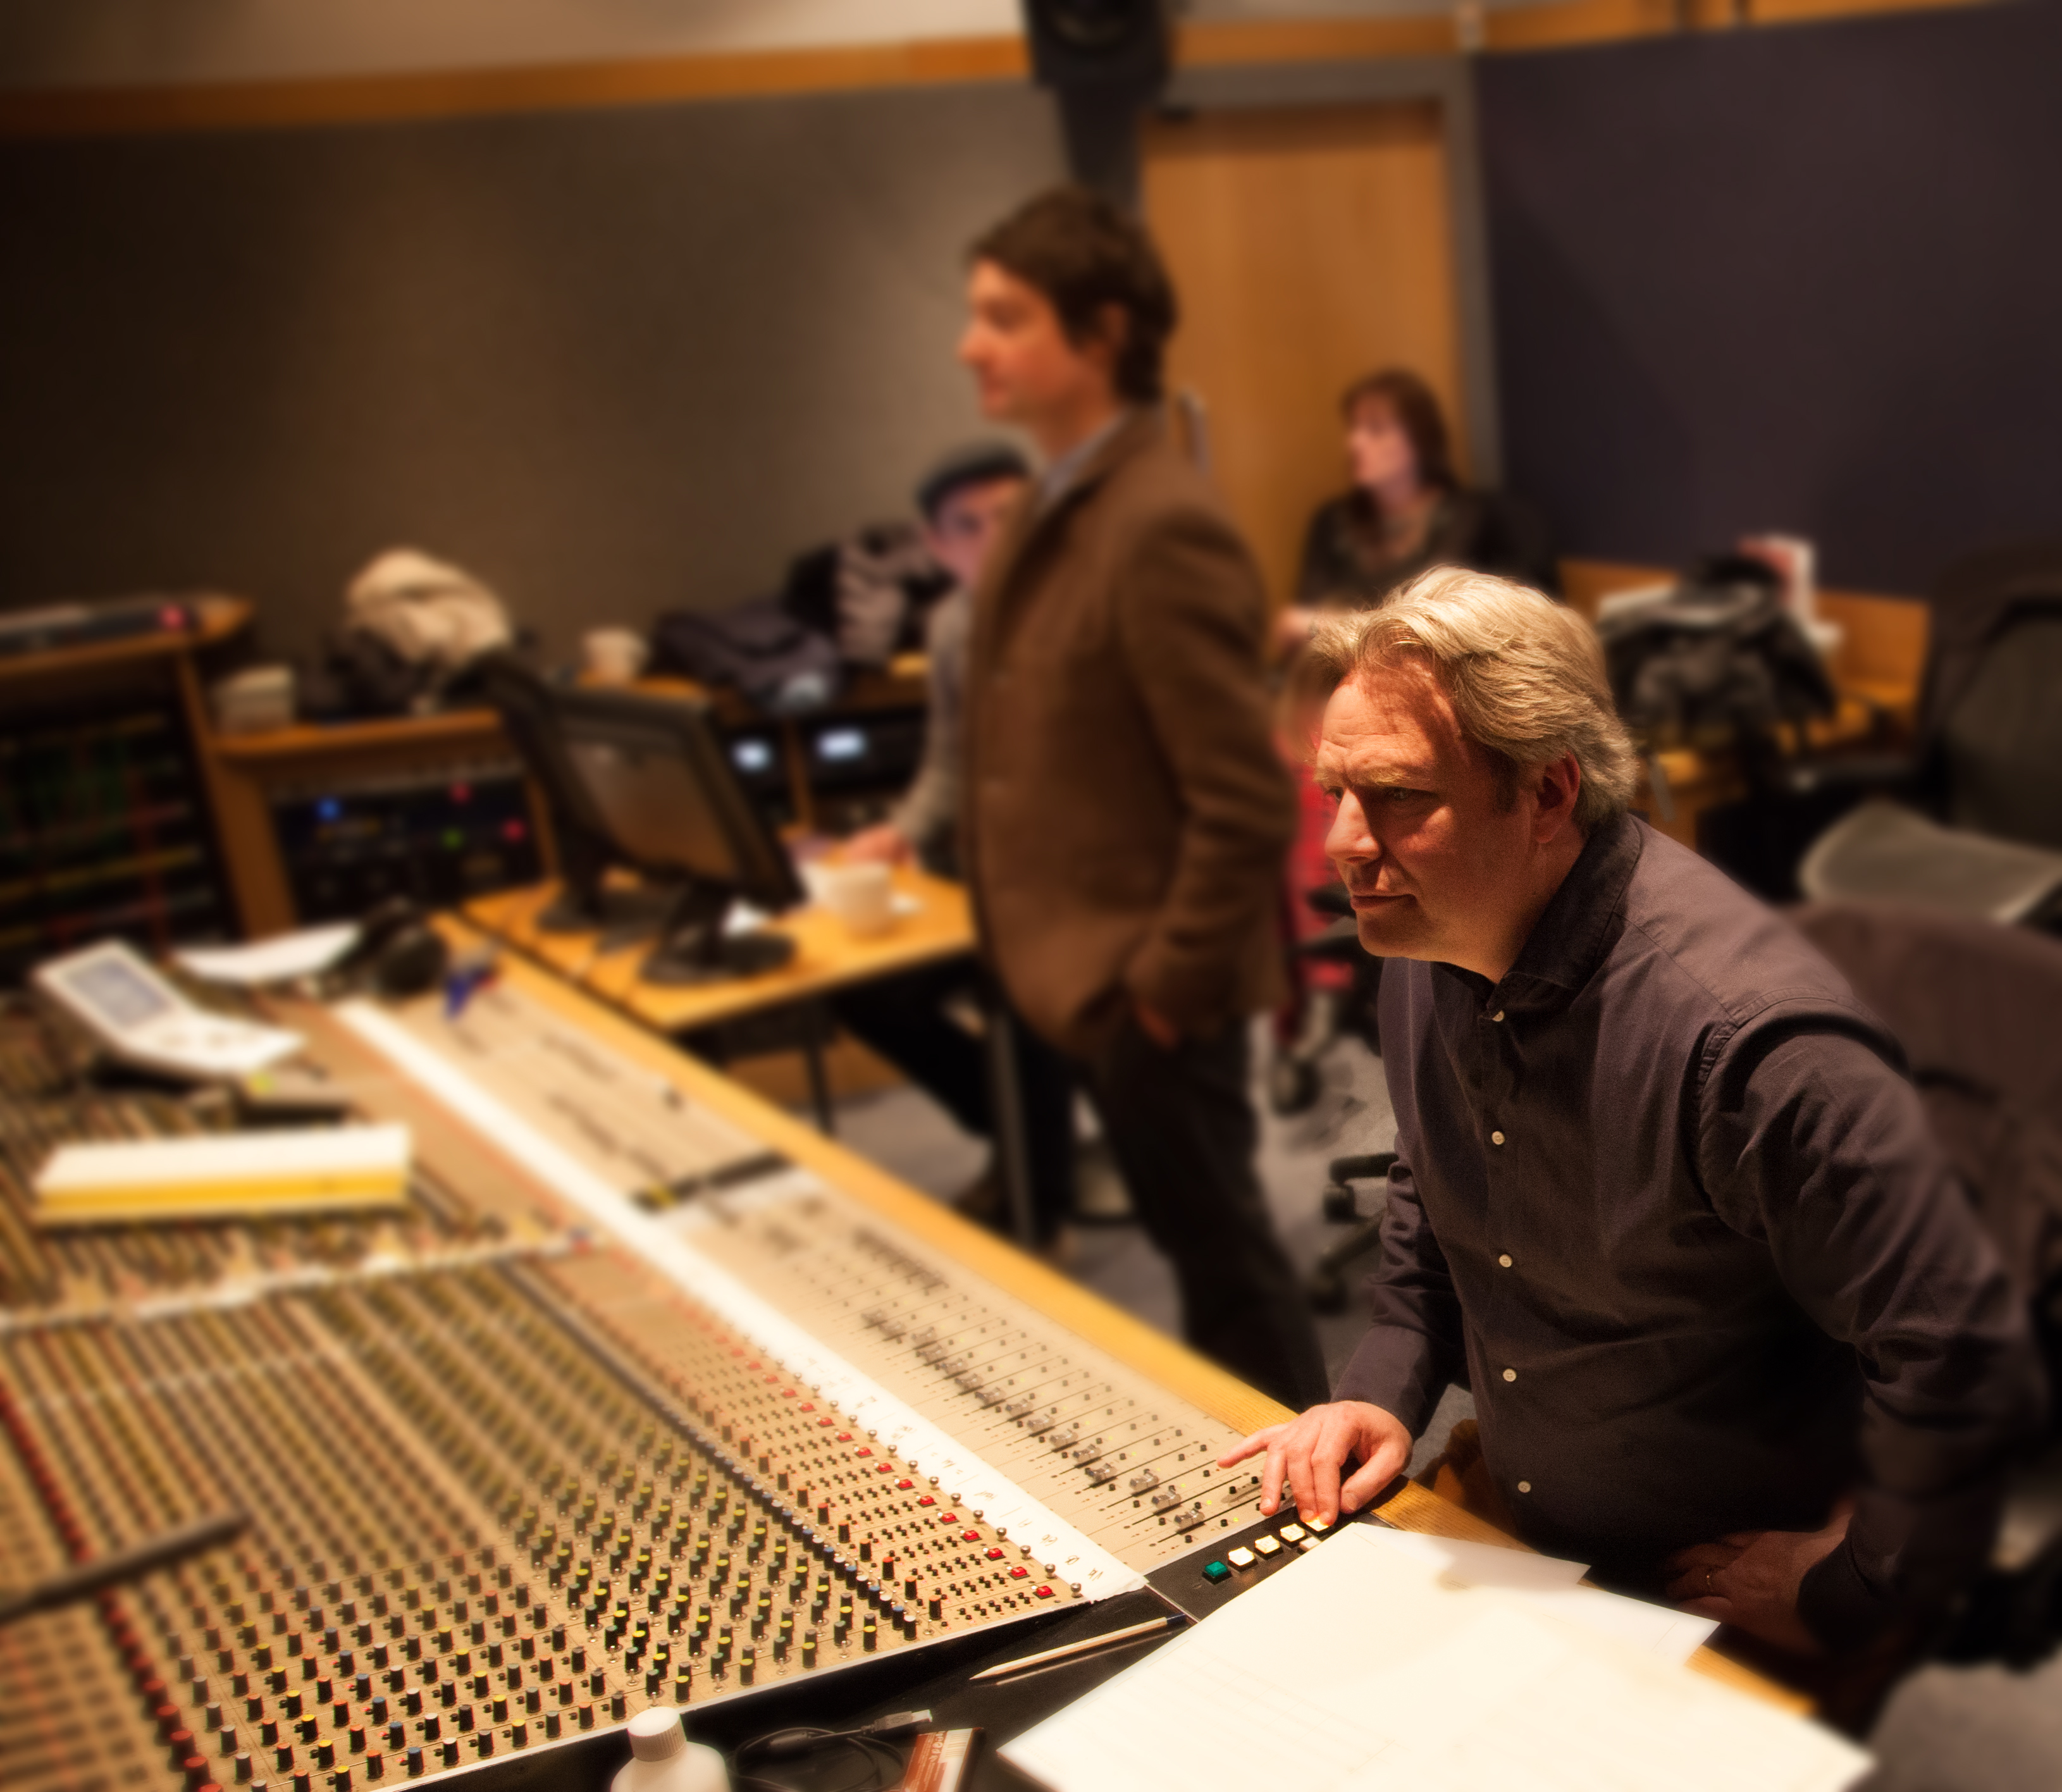 Brand and Pep scoring session, Air-Edel Studios, London, May 1st, 2015